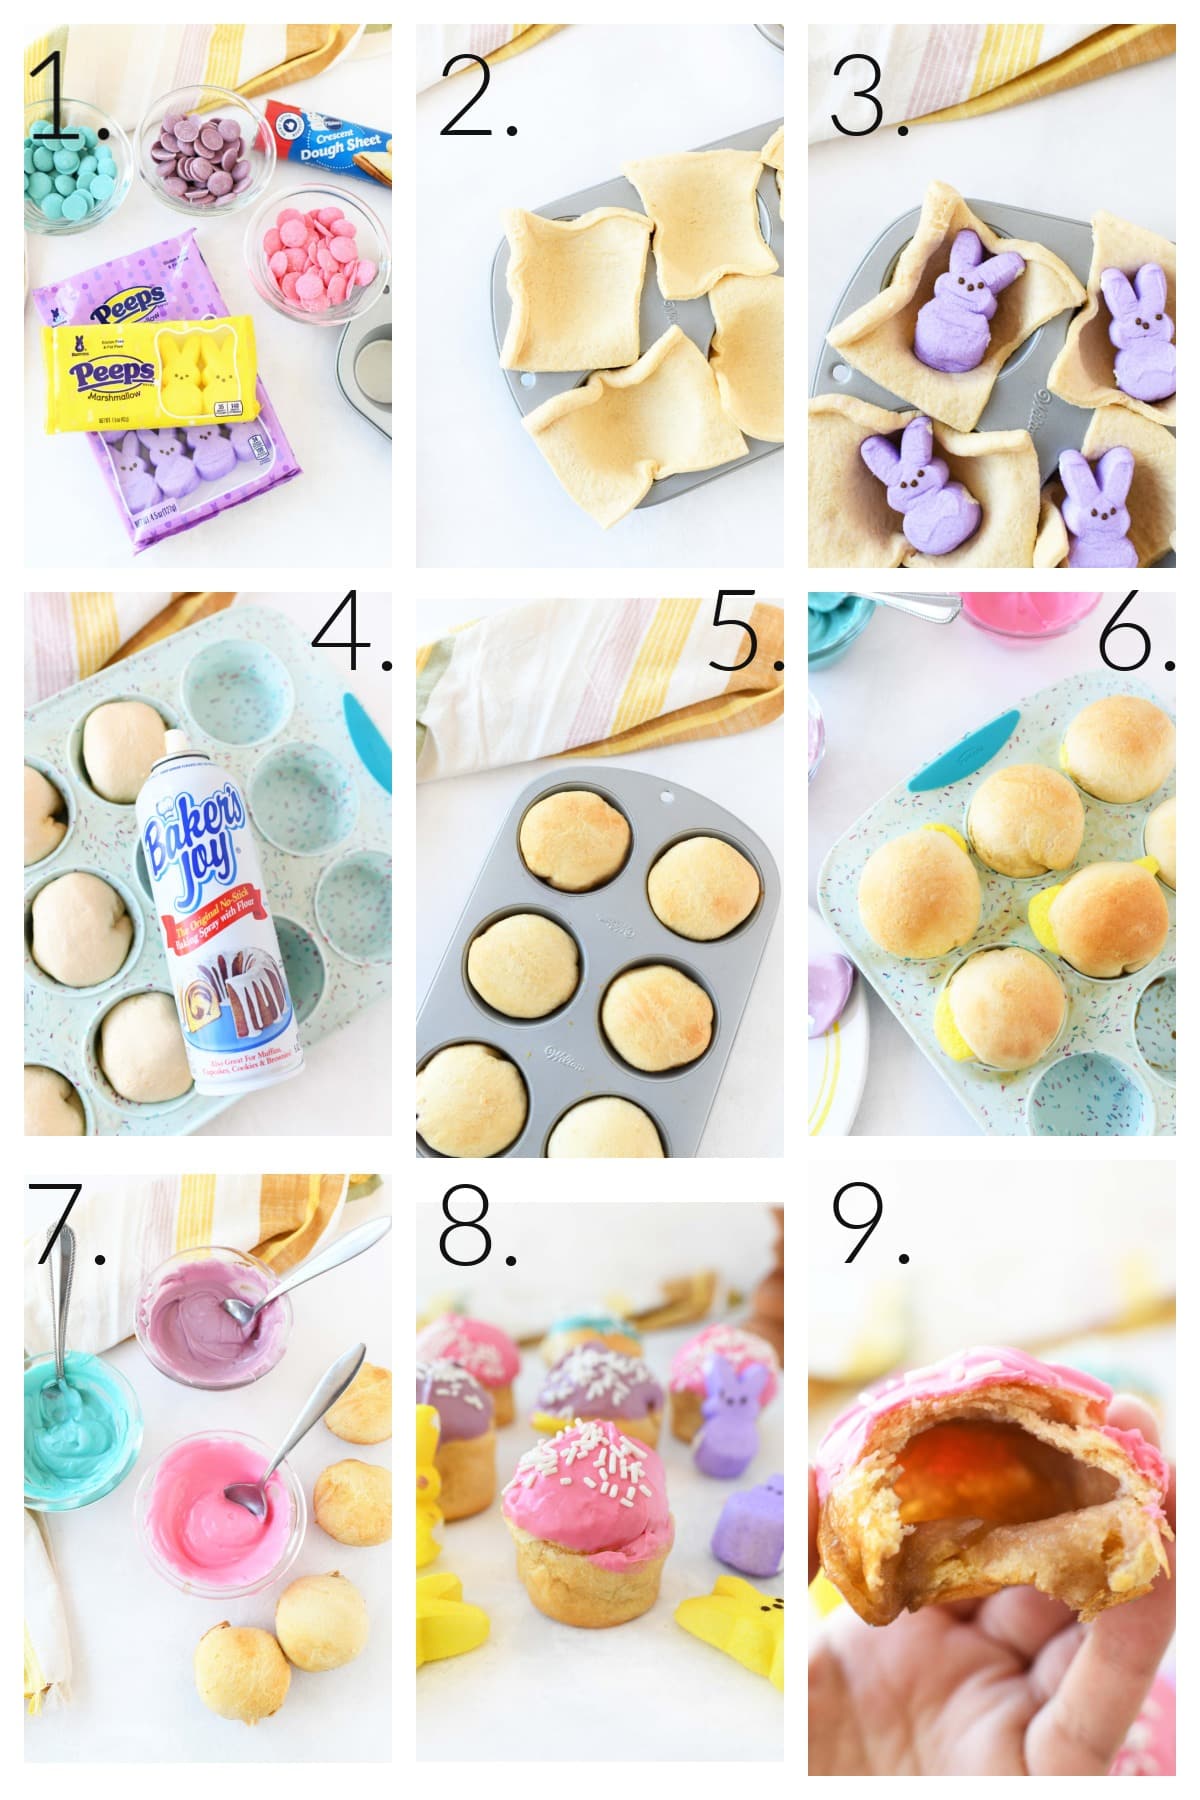 How to Make Peeps Magic Marshmallow Rolls. A colorful, numbered, step by step instructional collage on how to make these magic rolls.  